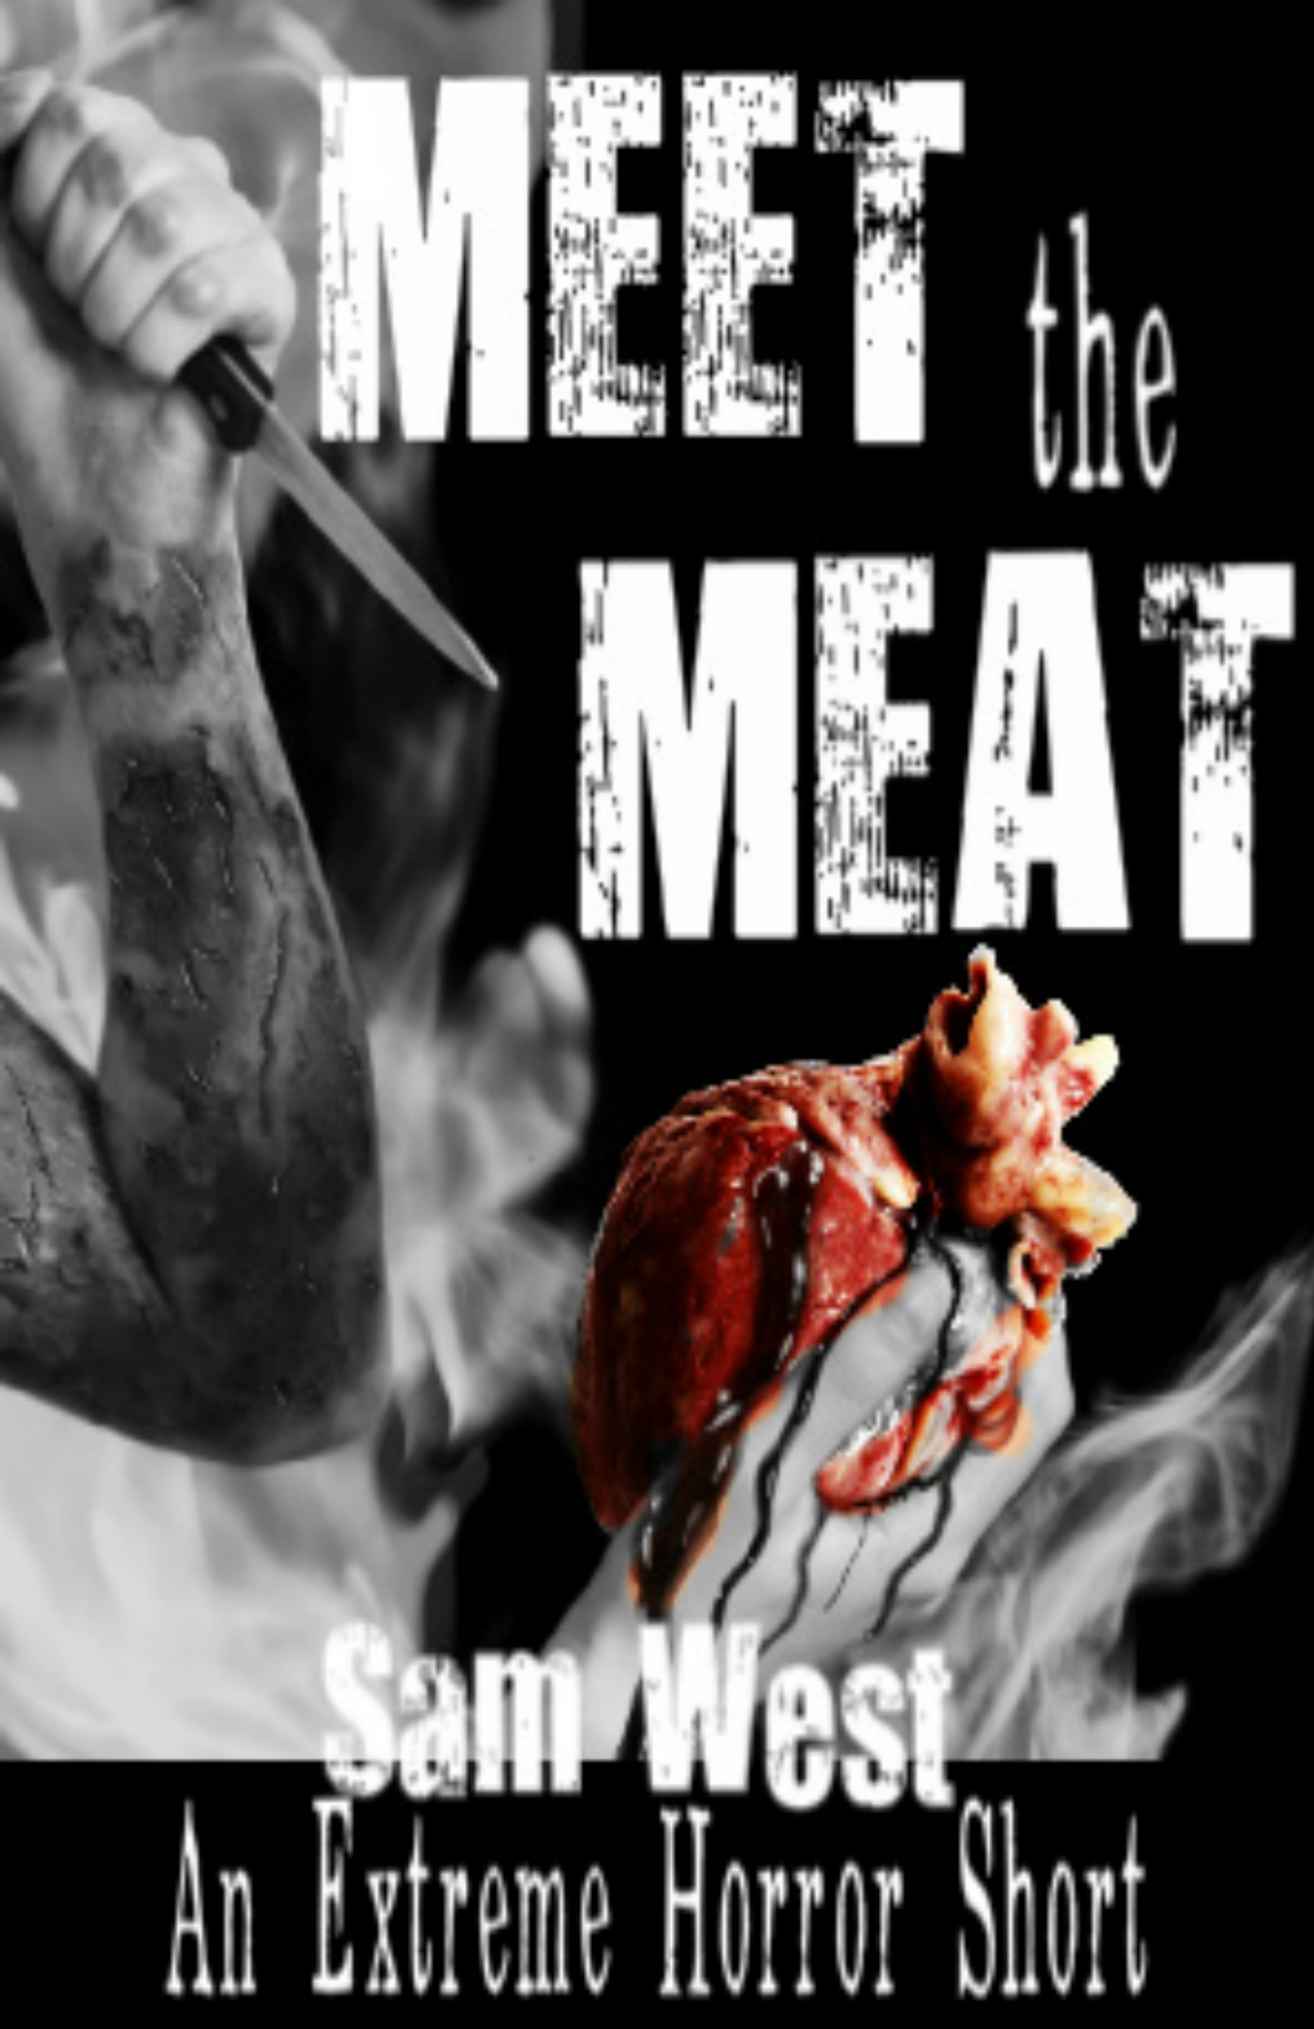 Meet The Meat